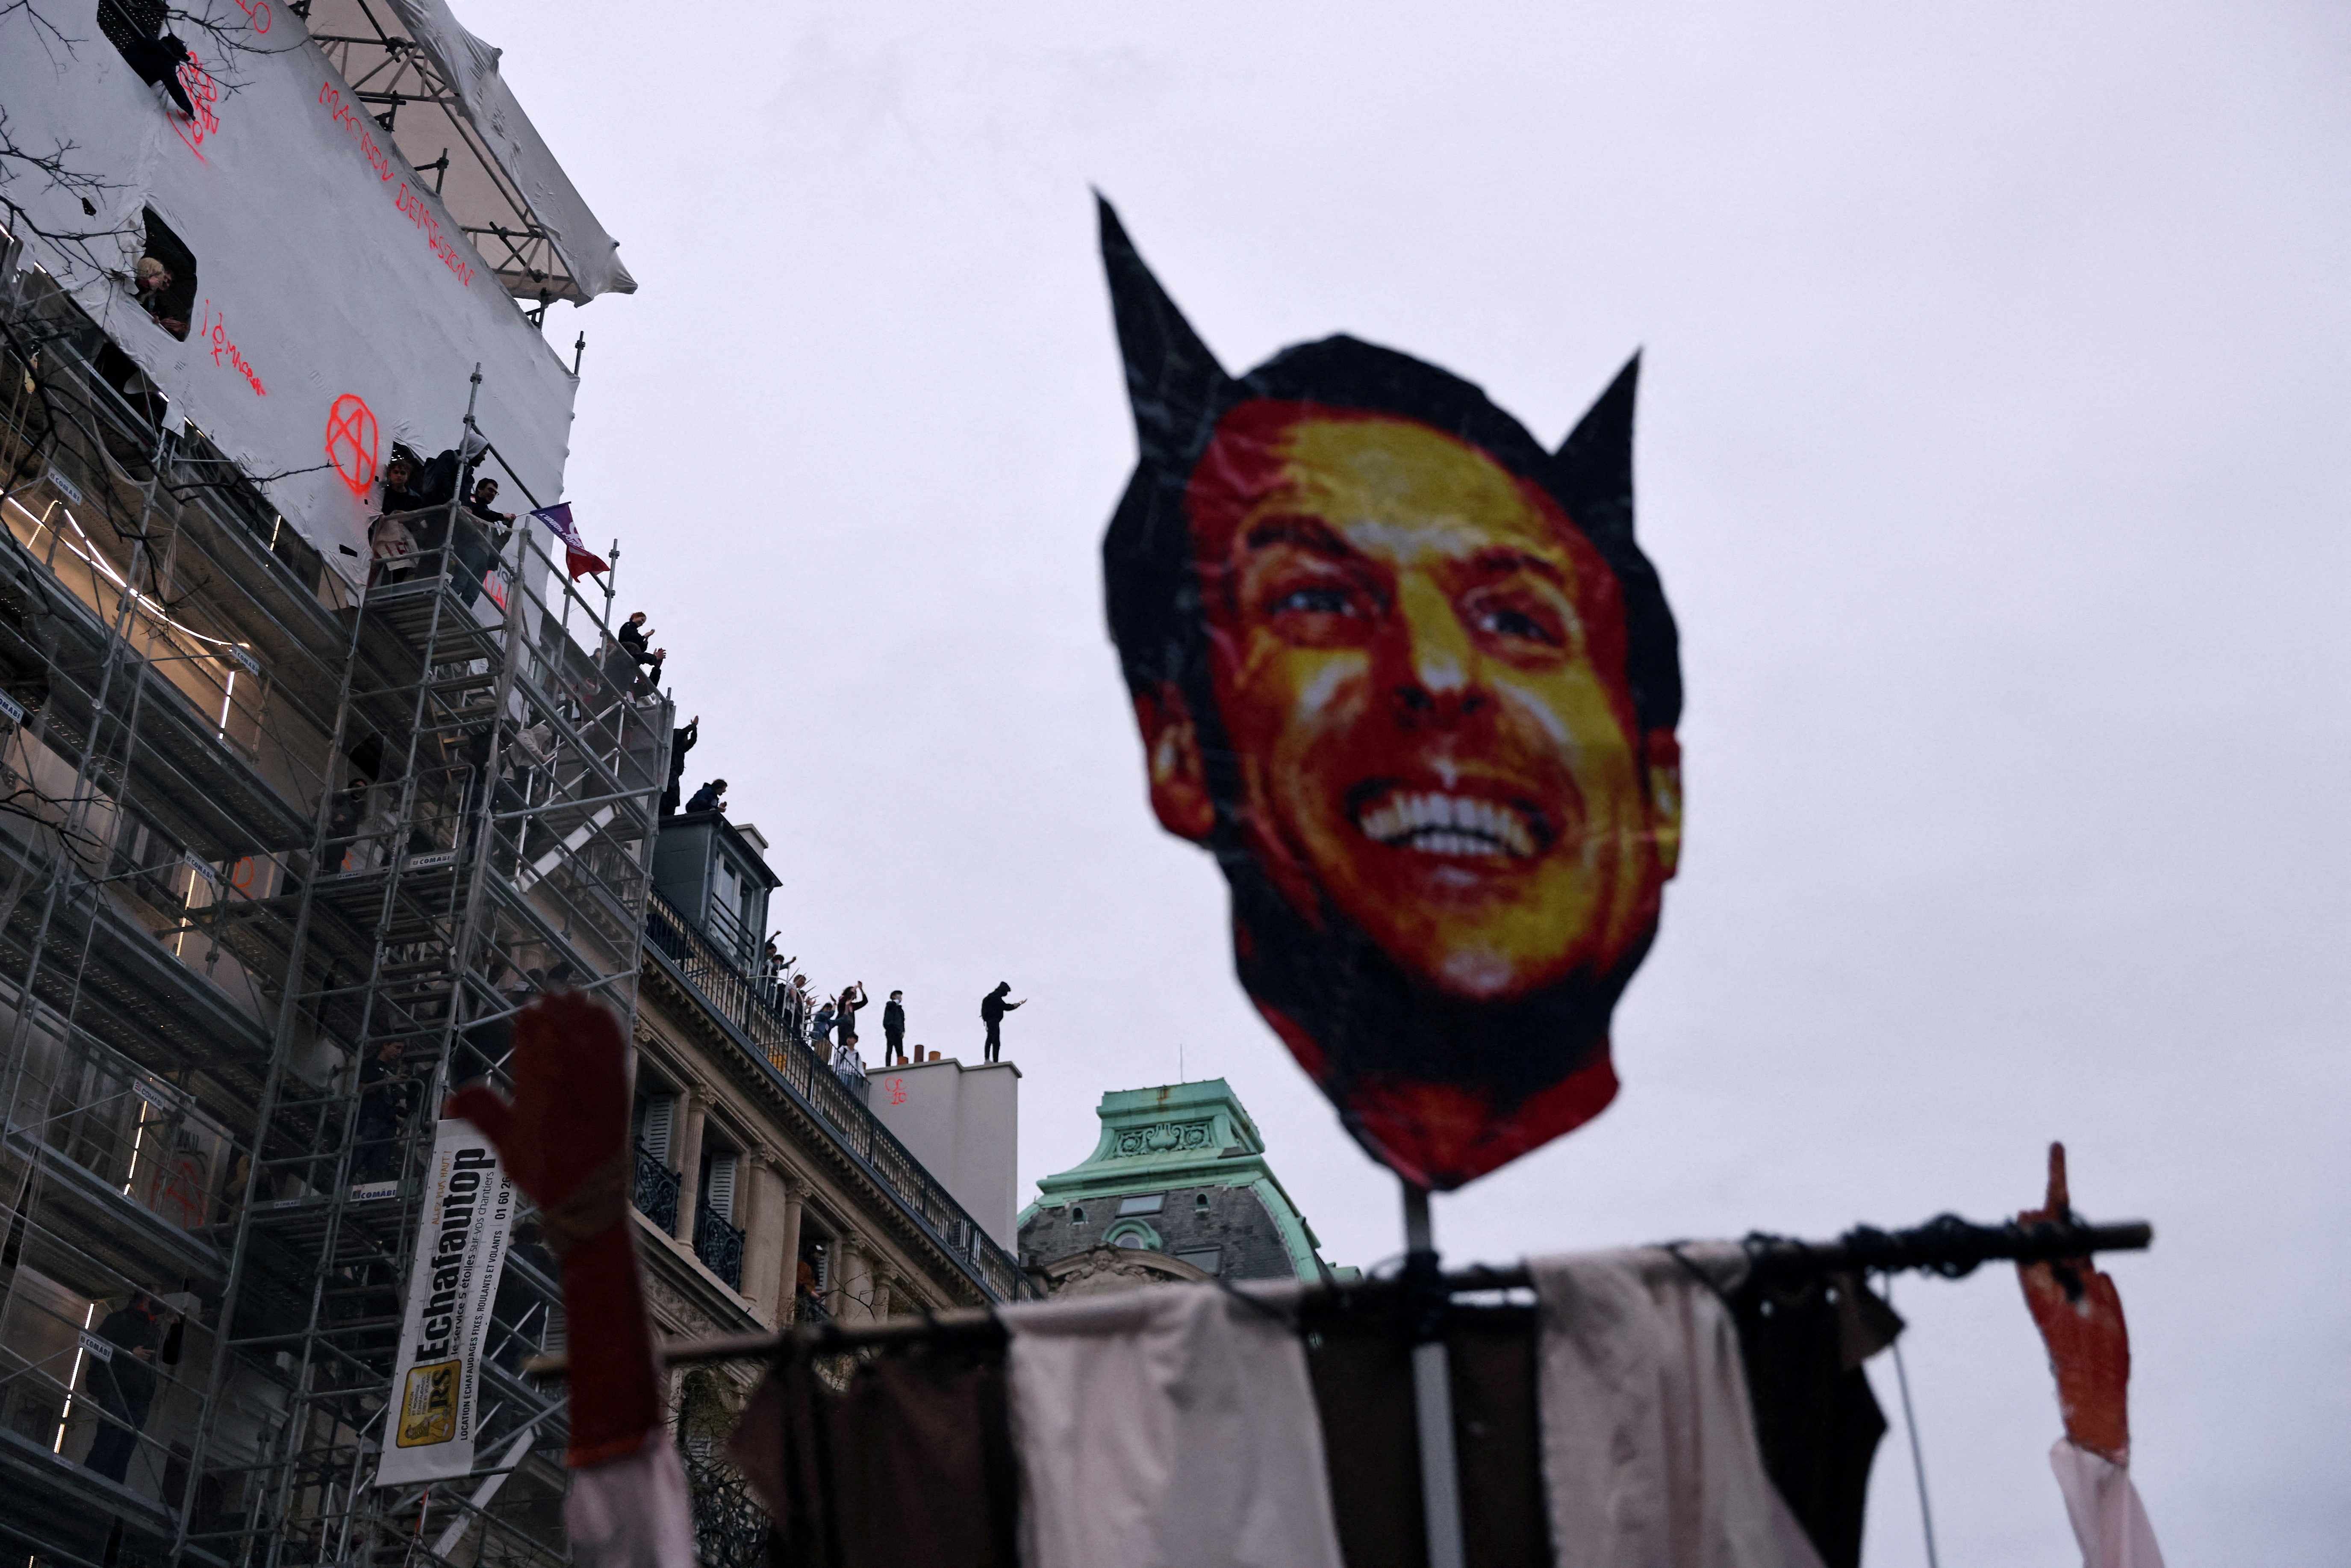 A placard with a portrait of French President Emmanuel Macron as the devil is seen as protesters stand on the top of a Parisian building during a demonstration as part of the ninth day of nationwide strikes and protests against French government's pension reform, in Paris, France, March 23, 2023. Credit: Reuters Photo